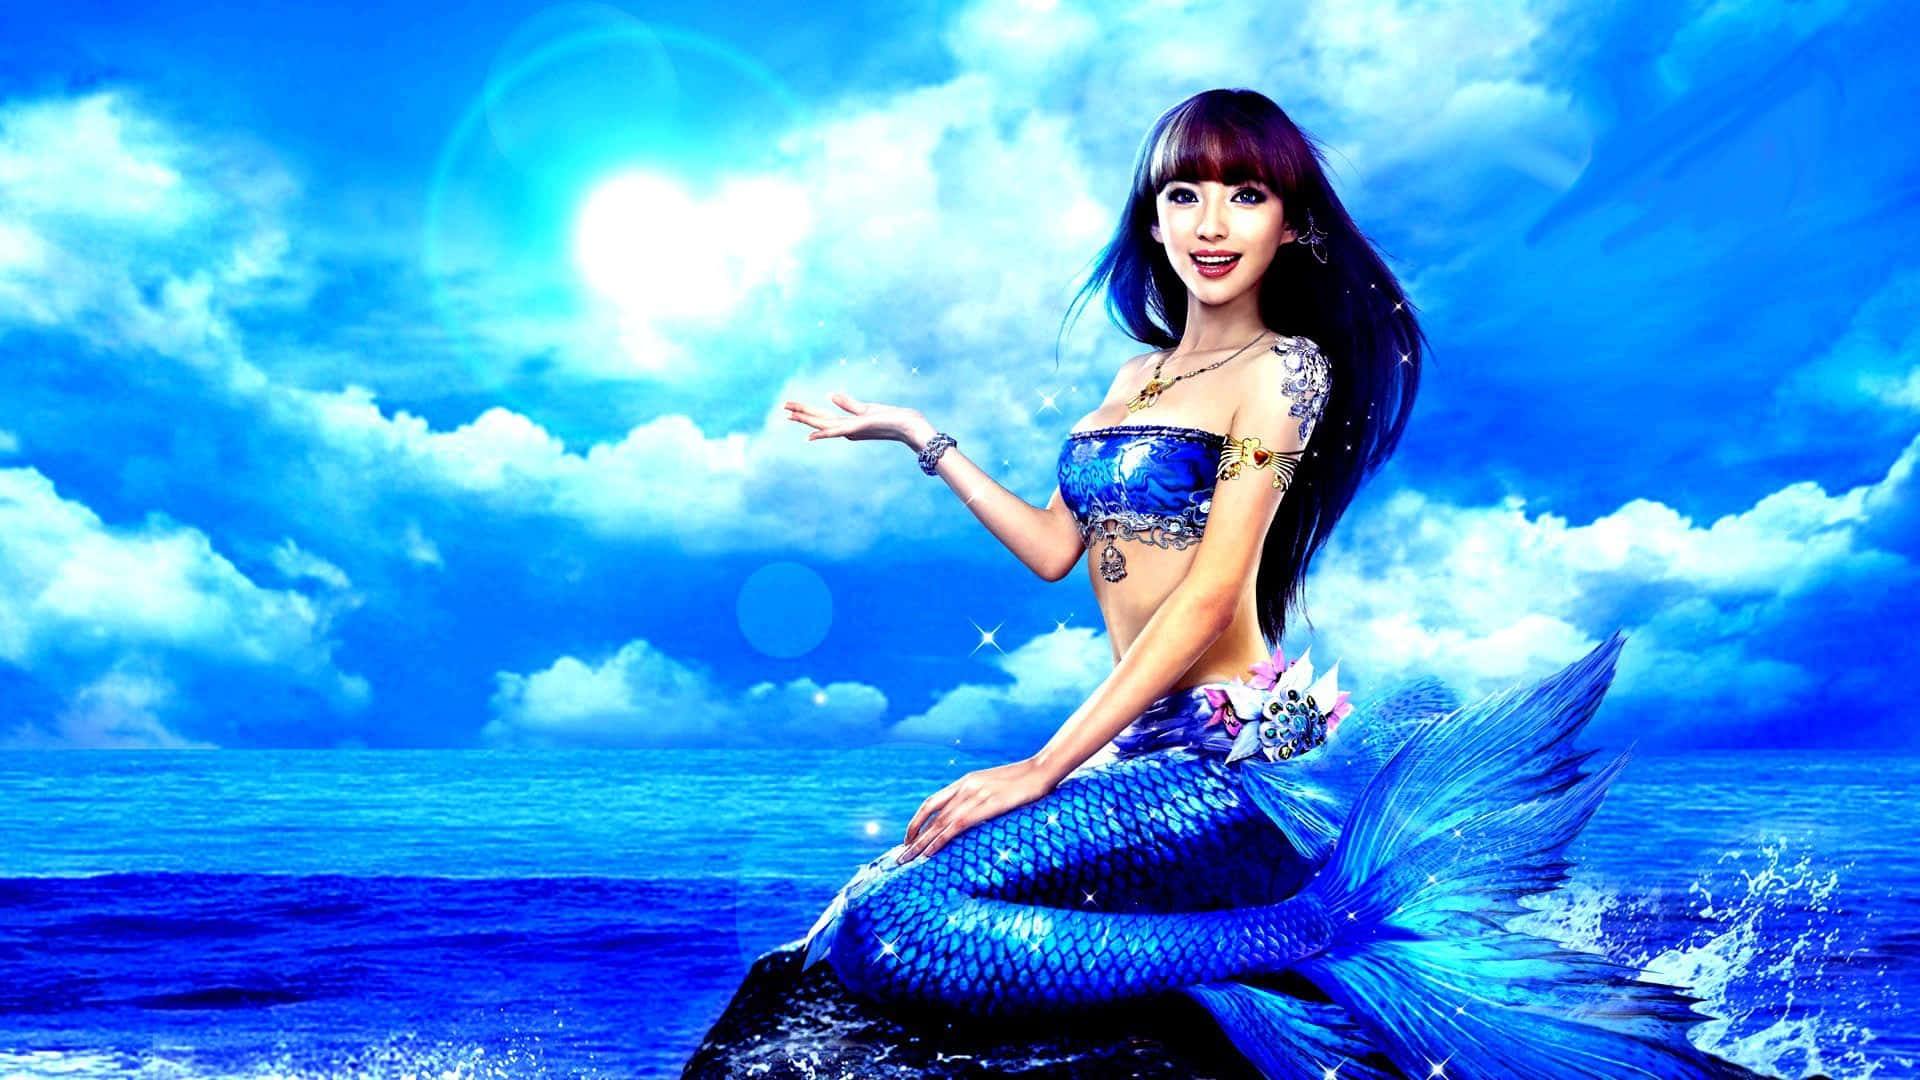 Mermaid With Bangs And Blue Tail Wallpaper